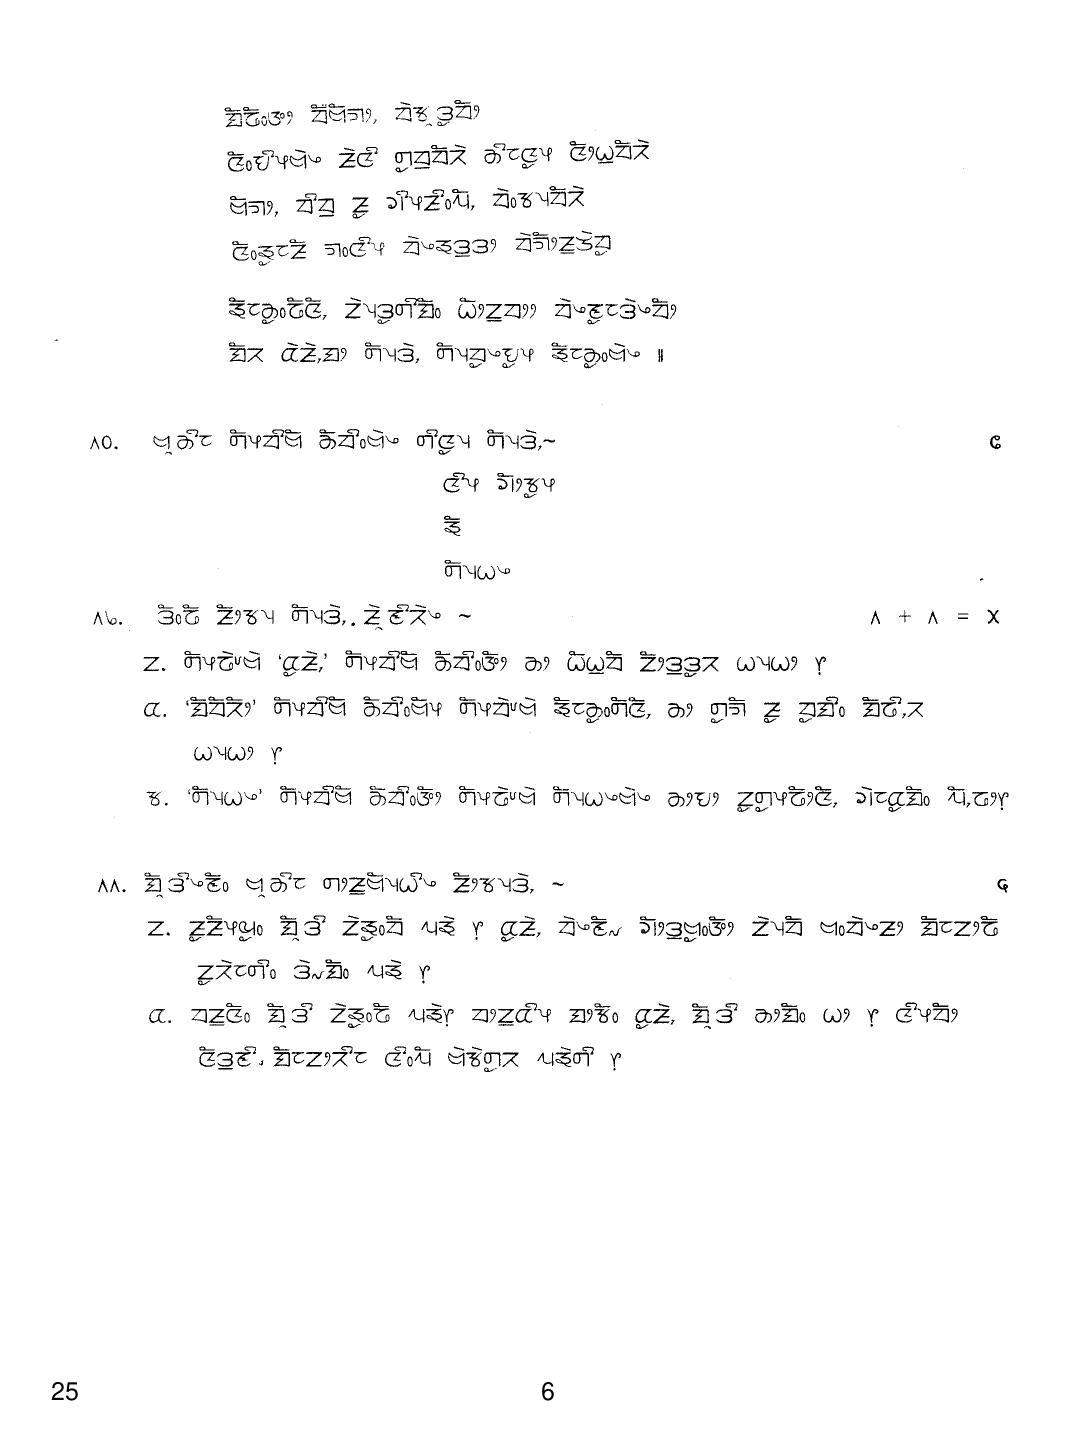 CBSE Class 12 25 Limboo 2019 Question Paper - Page 6